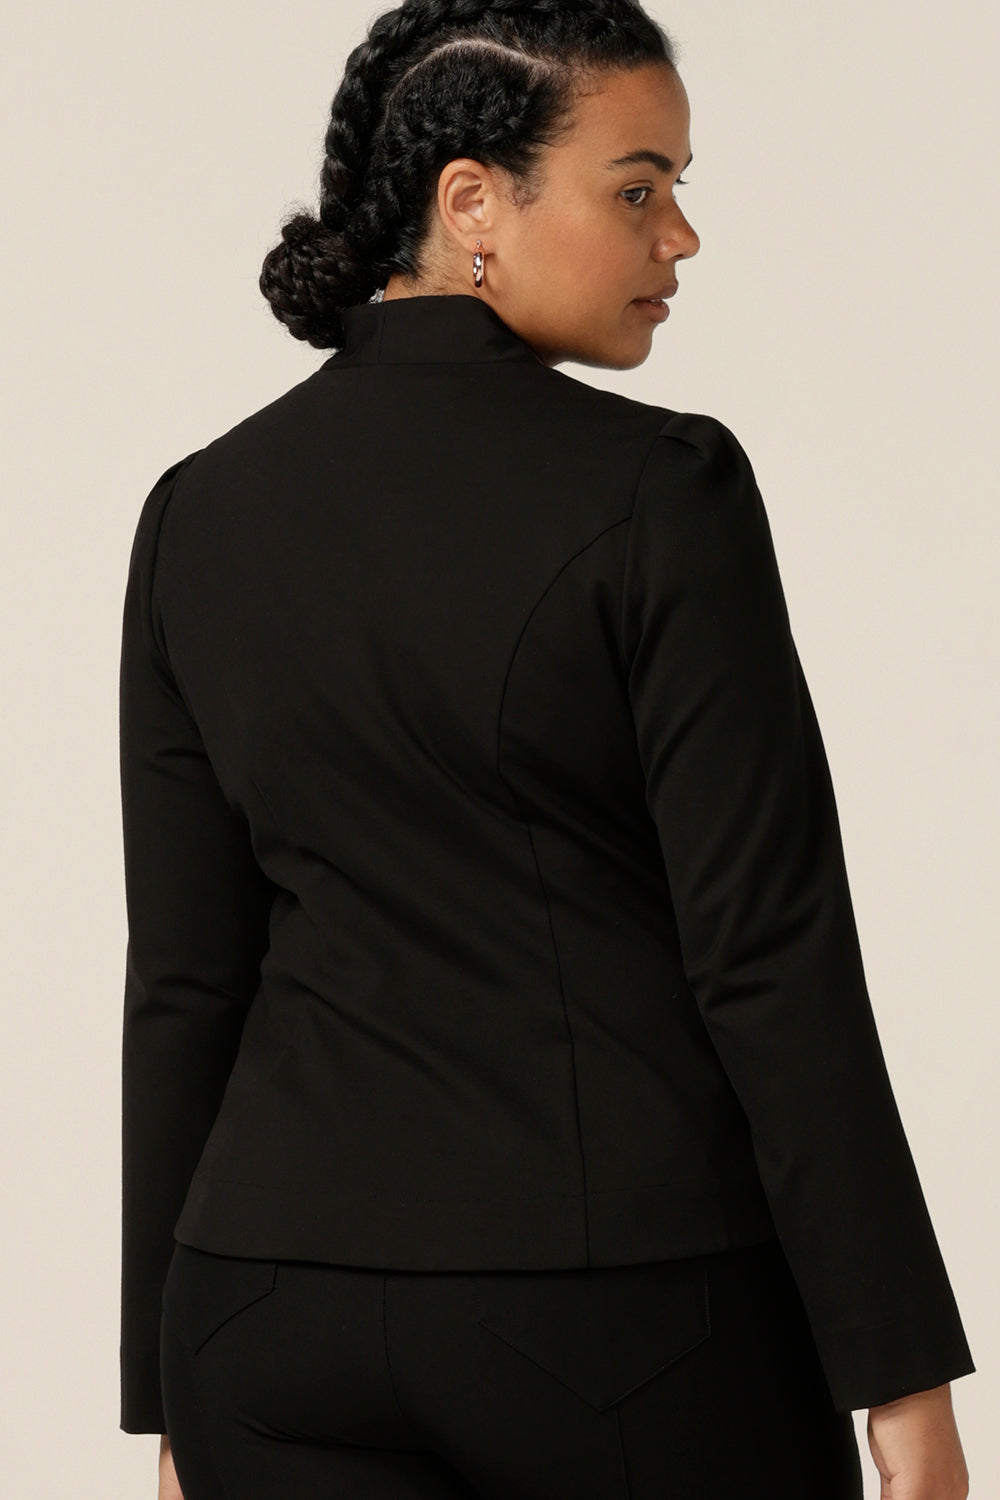 Back view of a size 12, curvy woman wearing a soft tailored black jacket with black workwear pants. Made in Australia for petite to plus sizes, the stretch ponte jersey jacket is well-fitting on womanly curves.